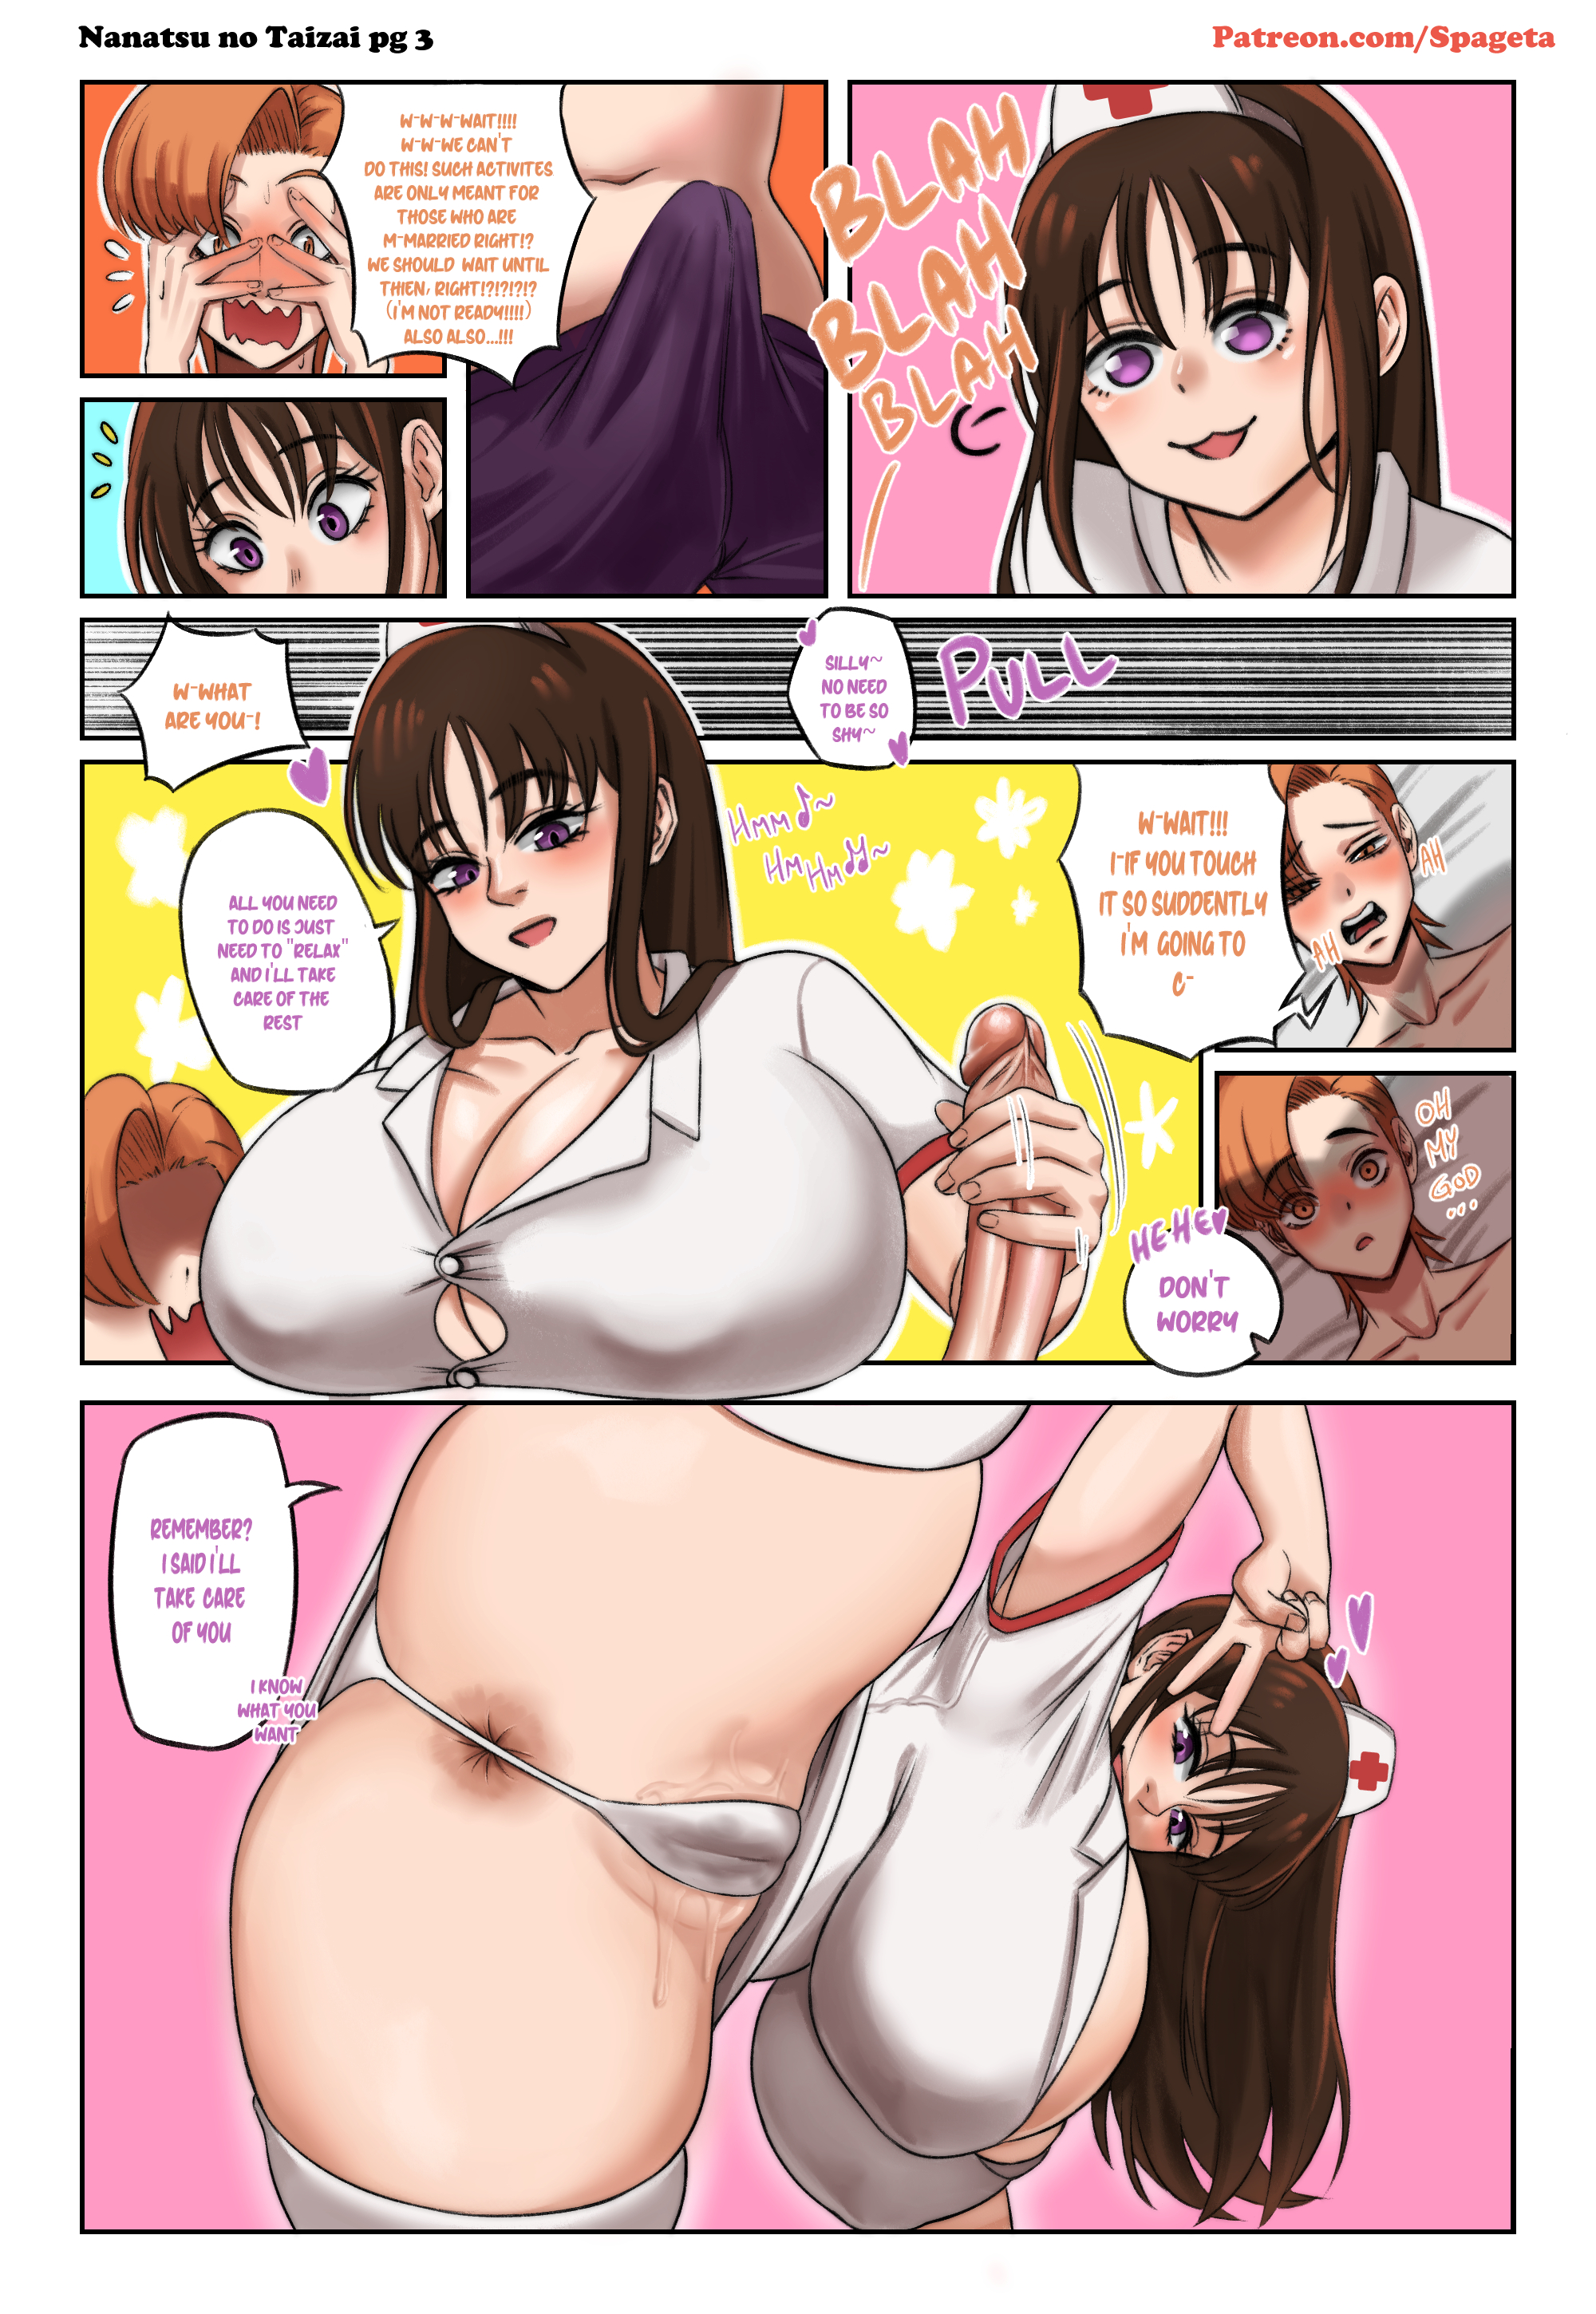 Sex with diane from seven deadly sins porn comics